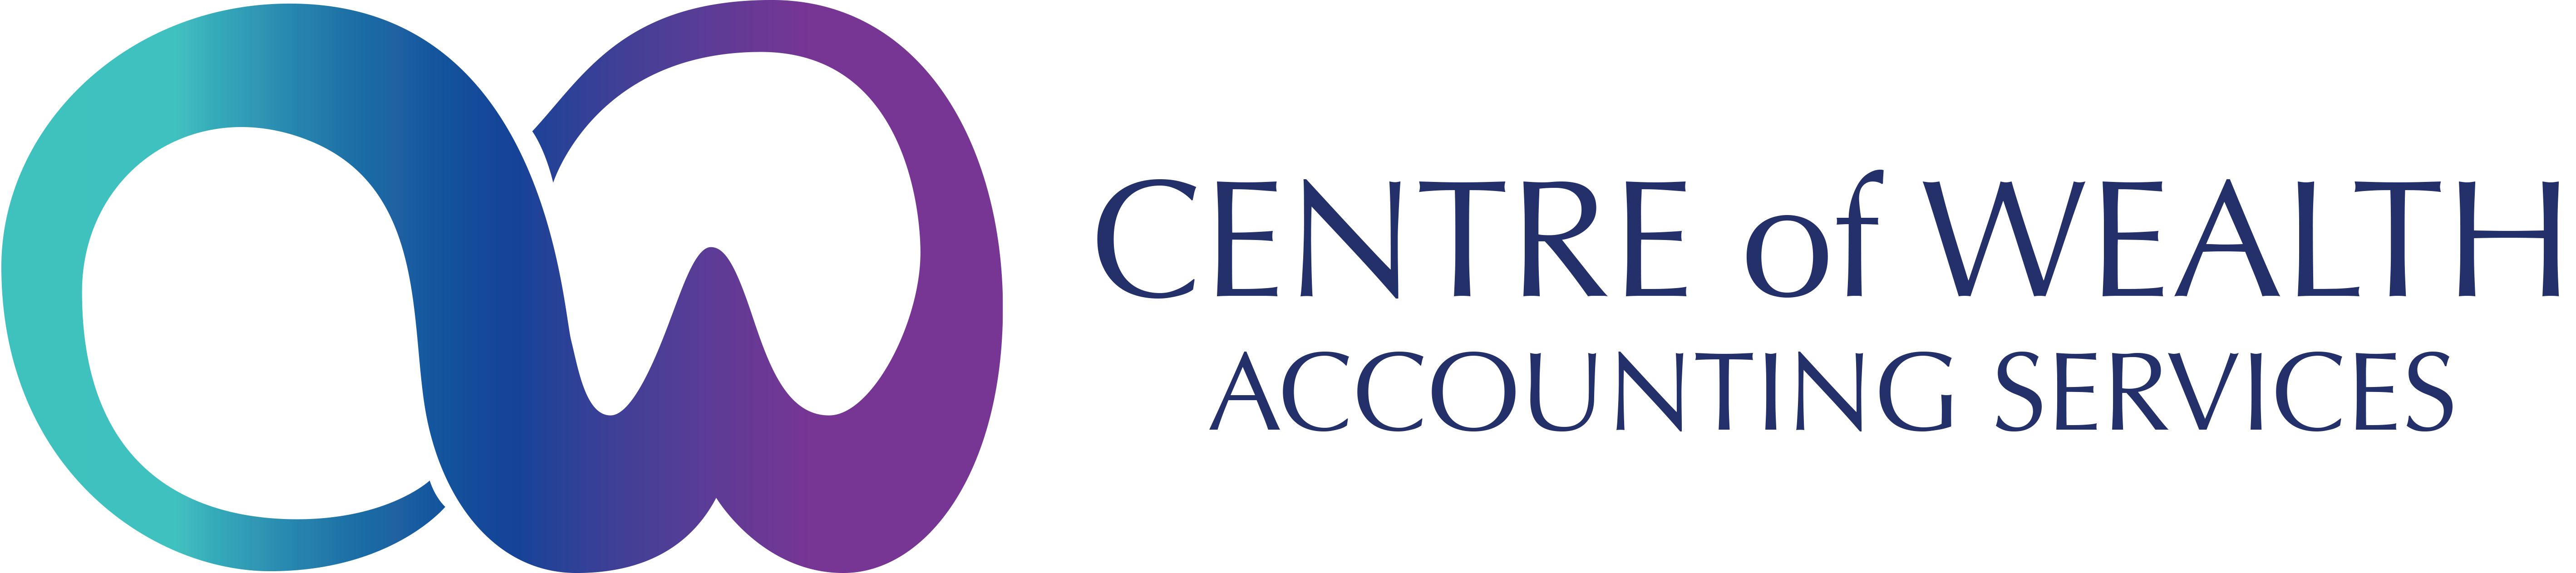 CWW Accounting Services logo